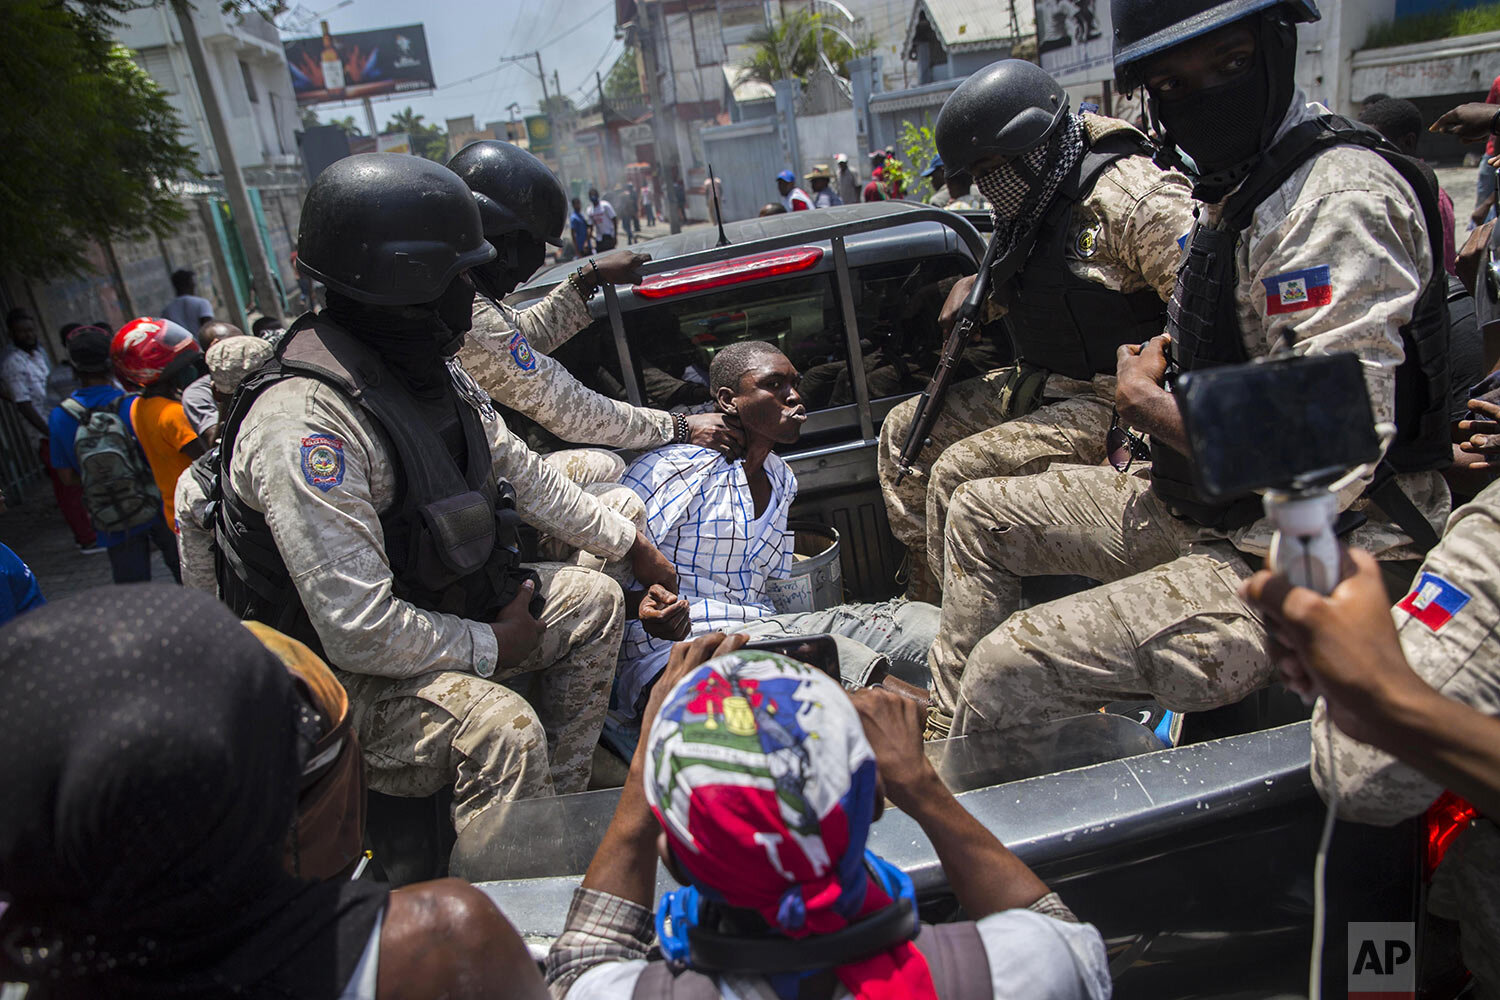  A man is detained by the police, accused of theft by demonstrators, during a protest demanding the resignation of President Jovenel Moise and against an upcoming constitutional referendum in Port-au-Prince, Haiti, May 18, 2021. (AP Photo/Joseph Odel